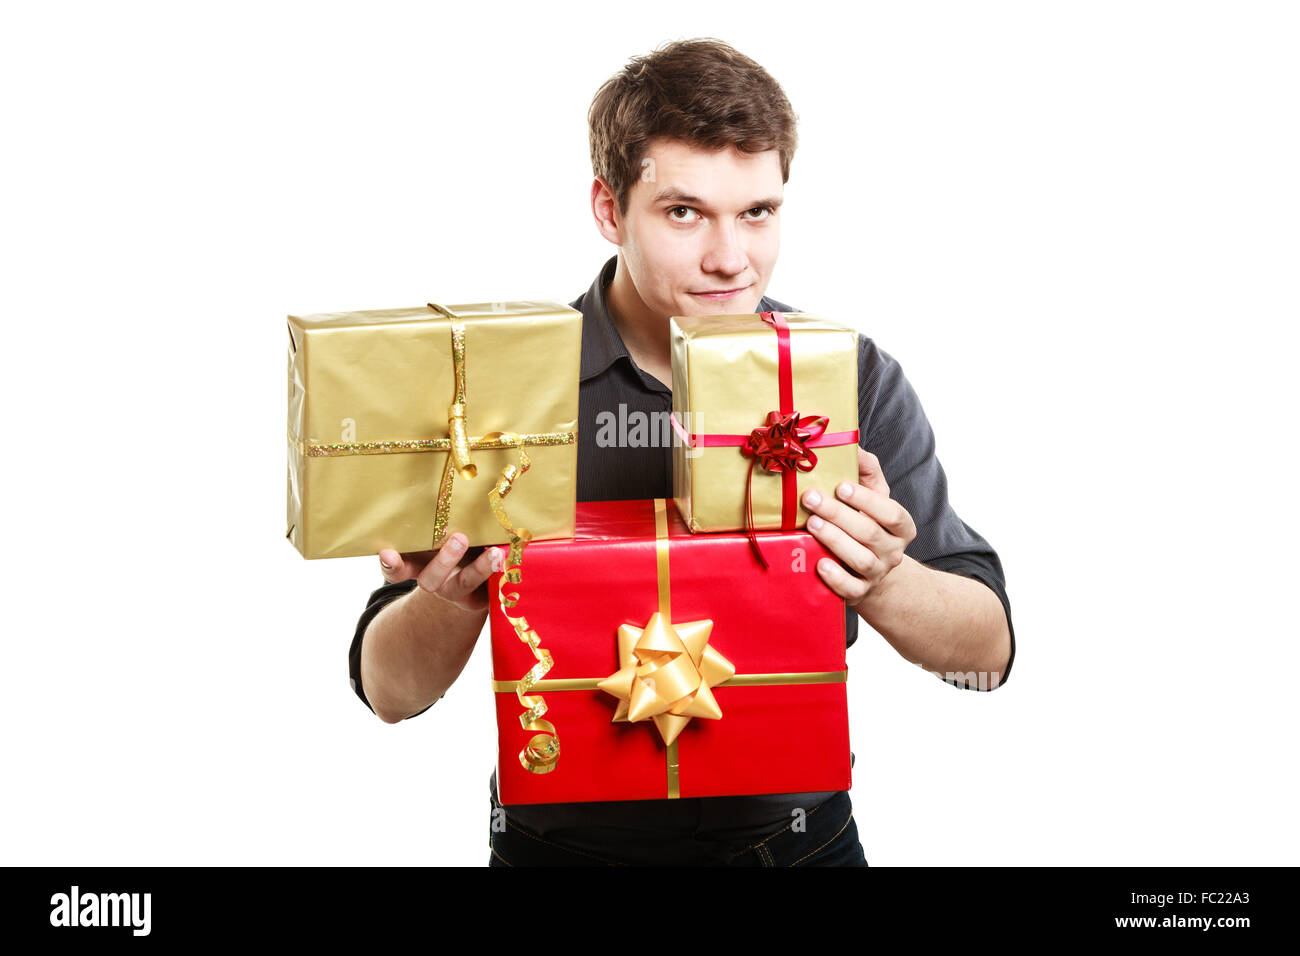 Holiday. Young man giving presents gifts boxes Stock Photo